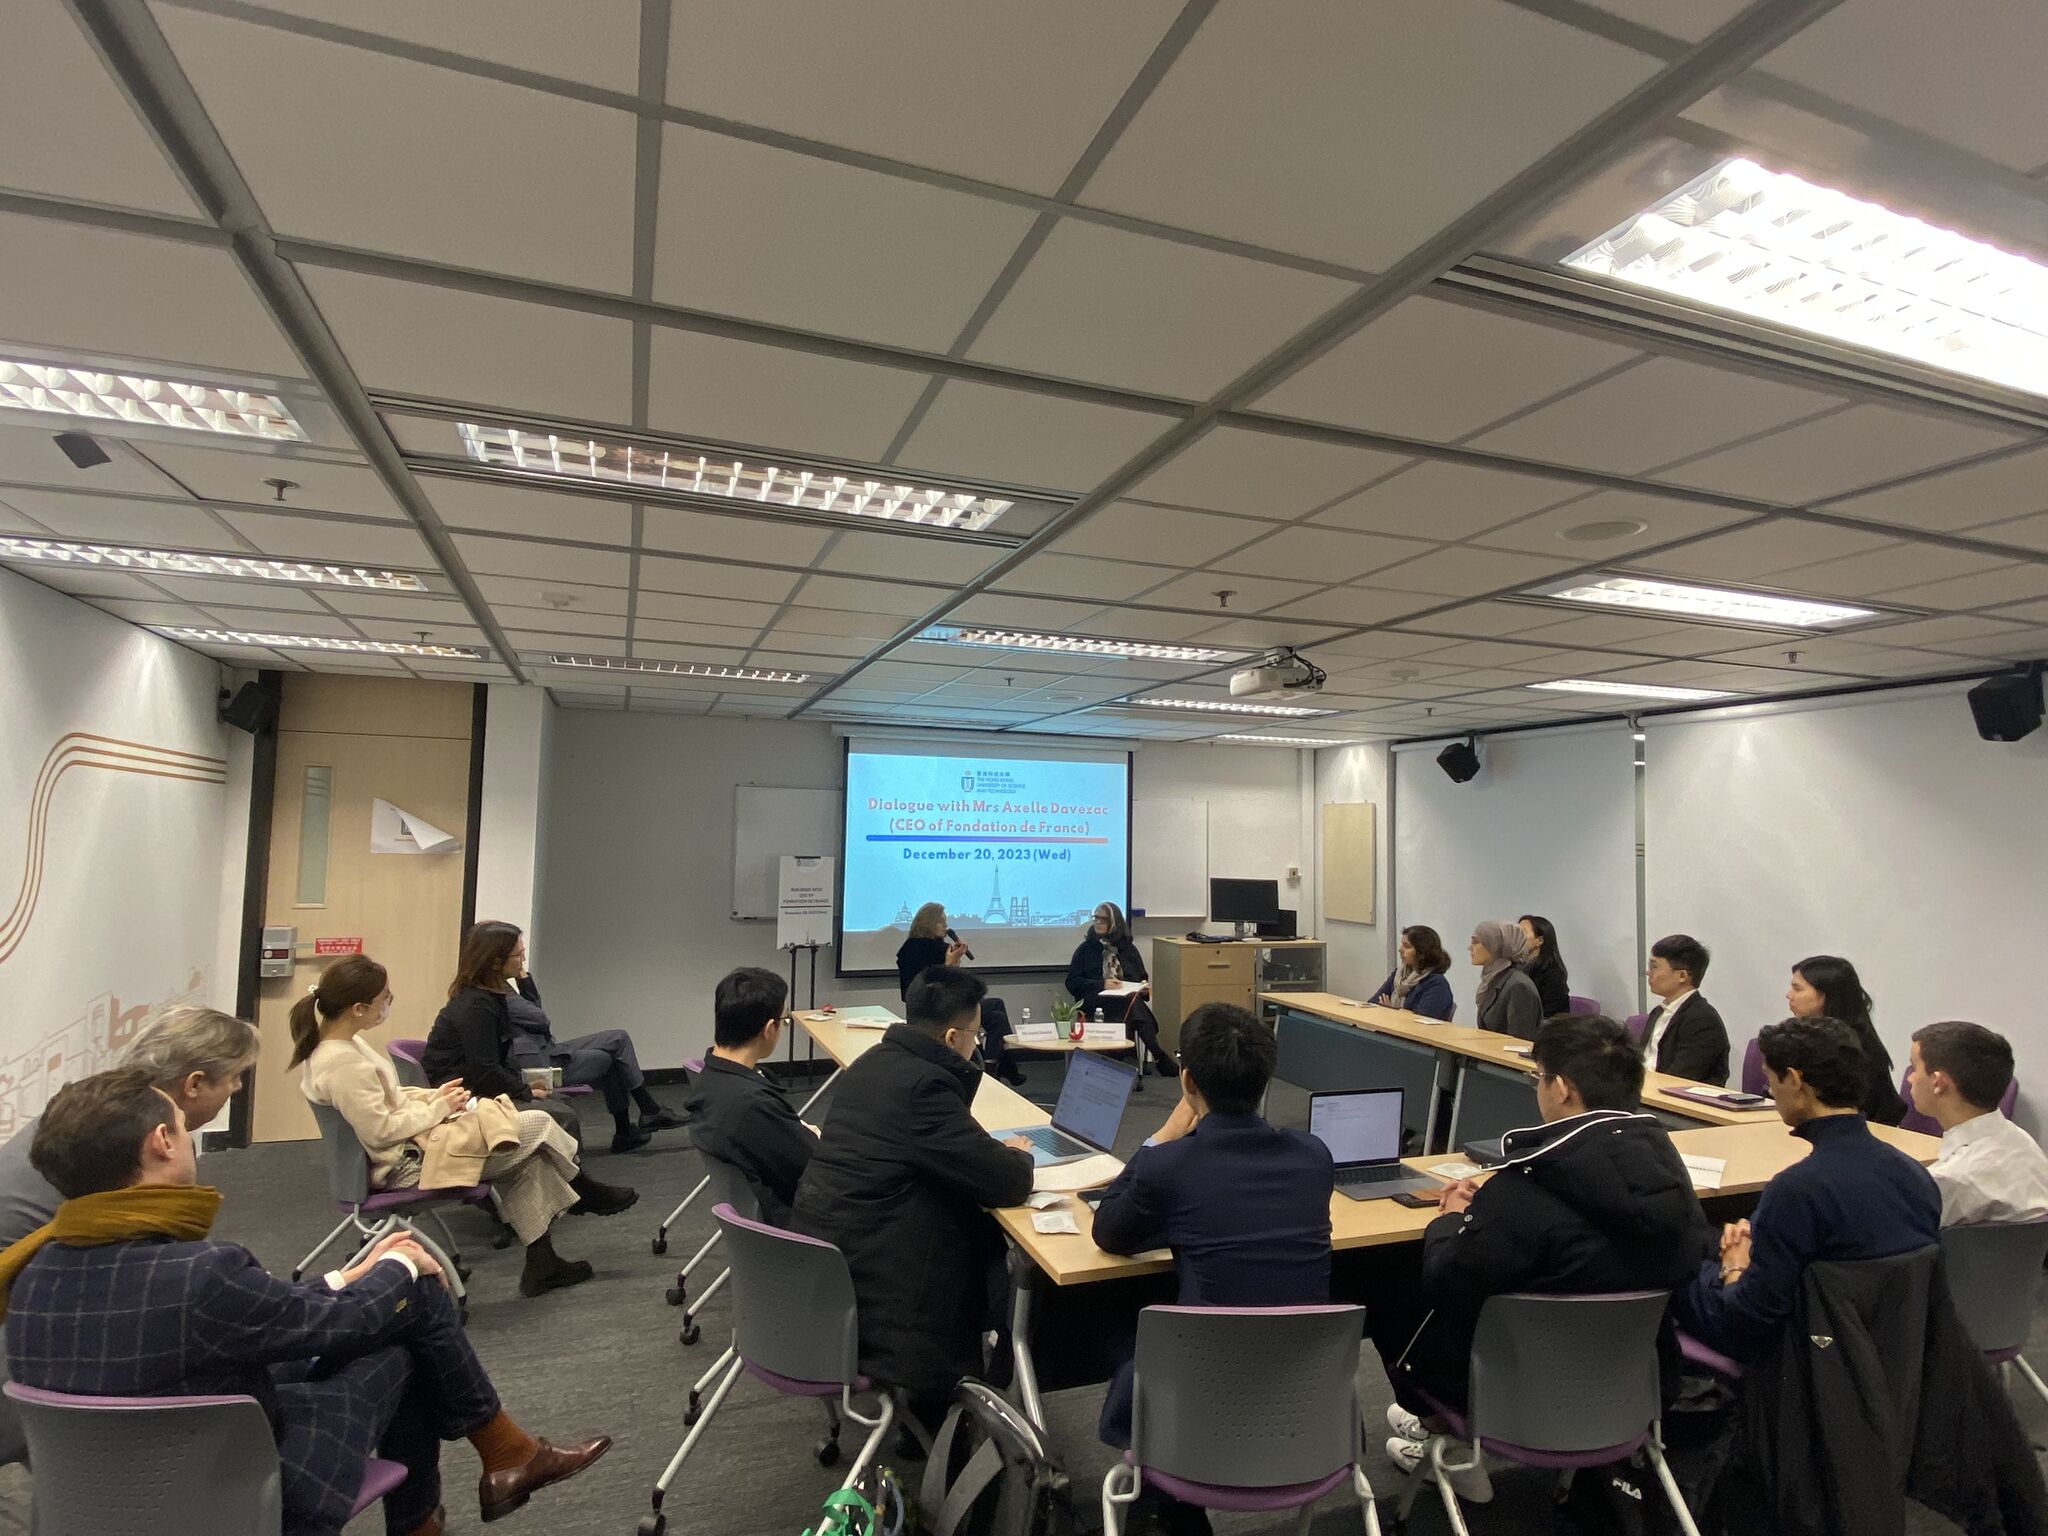 Mrs. Davezac had an exclusive dialogue with HKUST faculty and students.